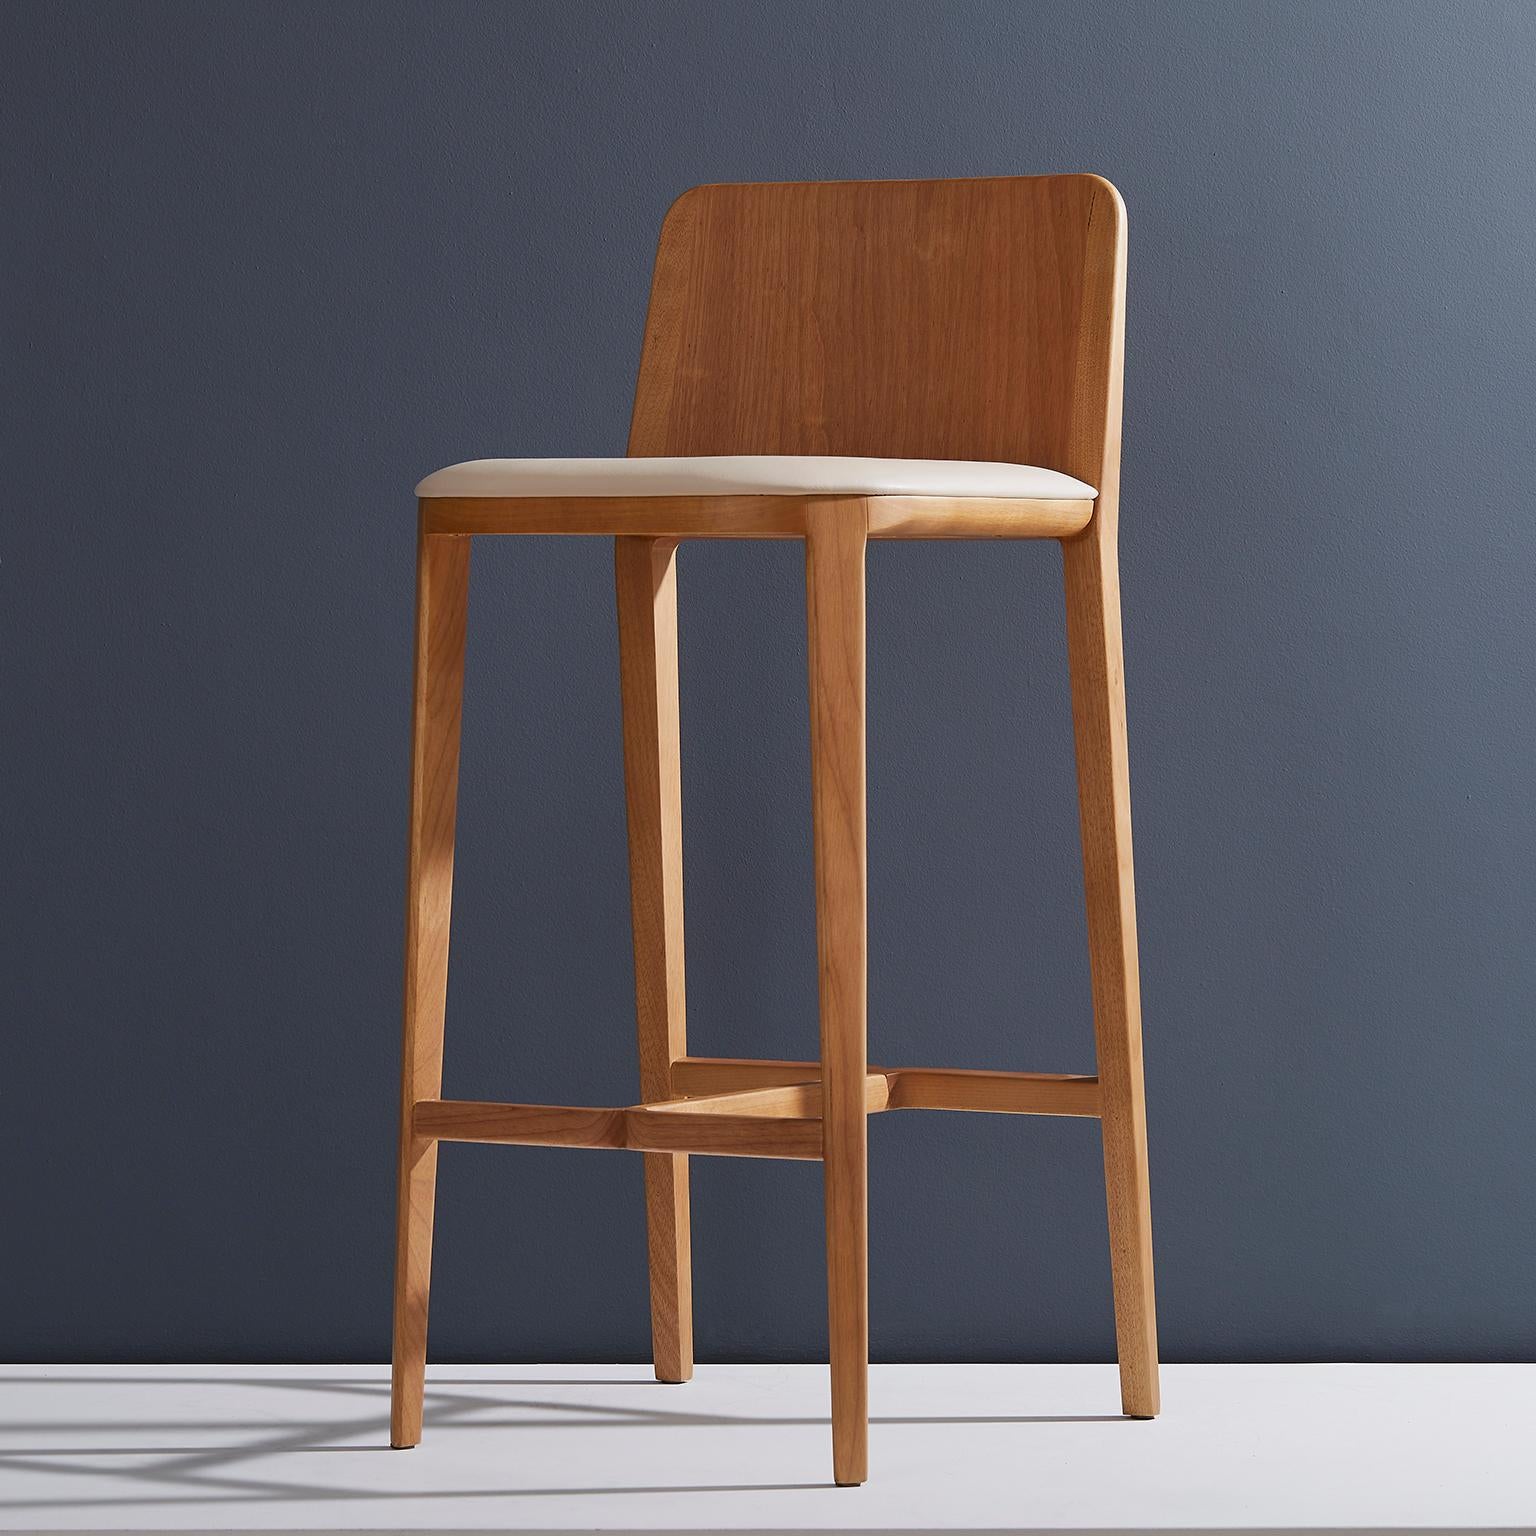 Minimal Style, Solid Wood Stool, Bar or Counter Hight, Caning and Leather For Sale 5